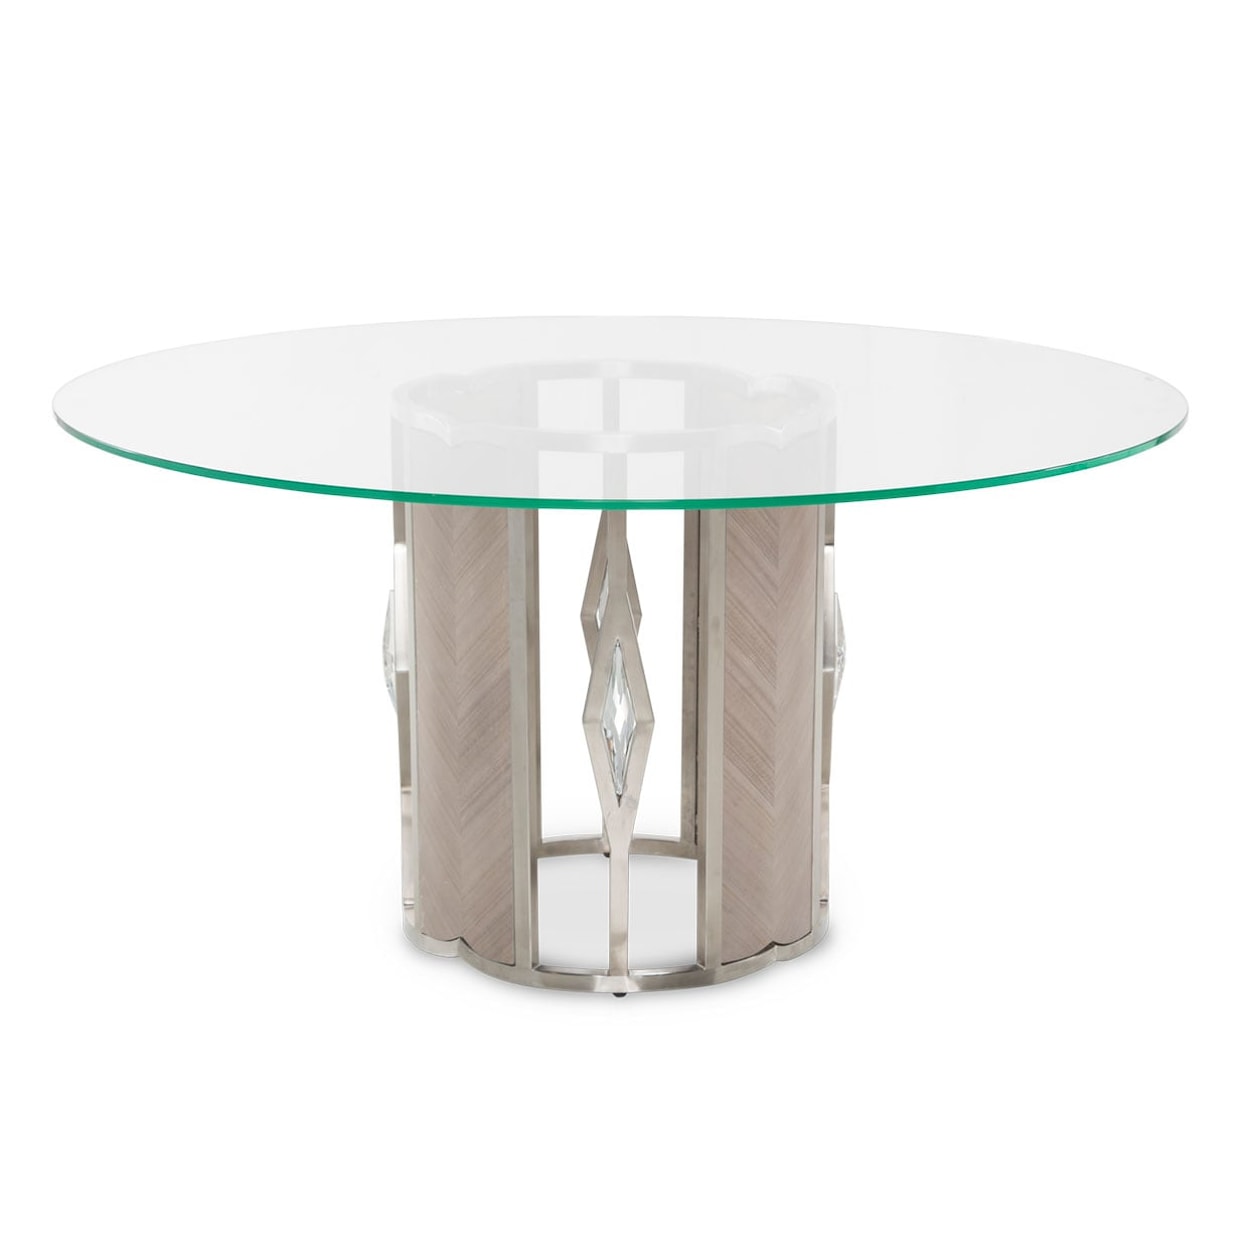 Michael Amini Camden Court Round Dining Table